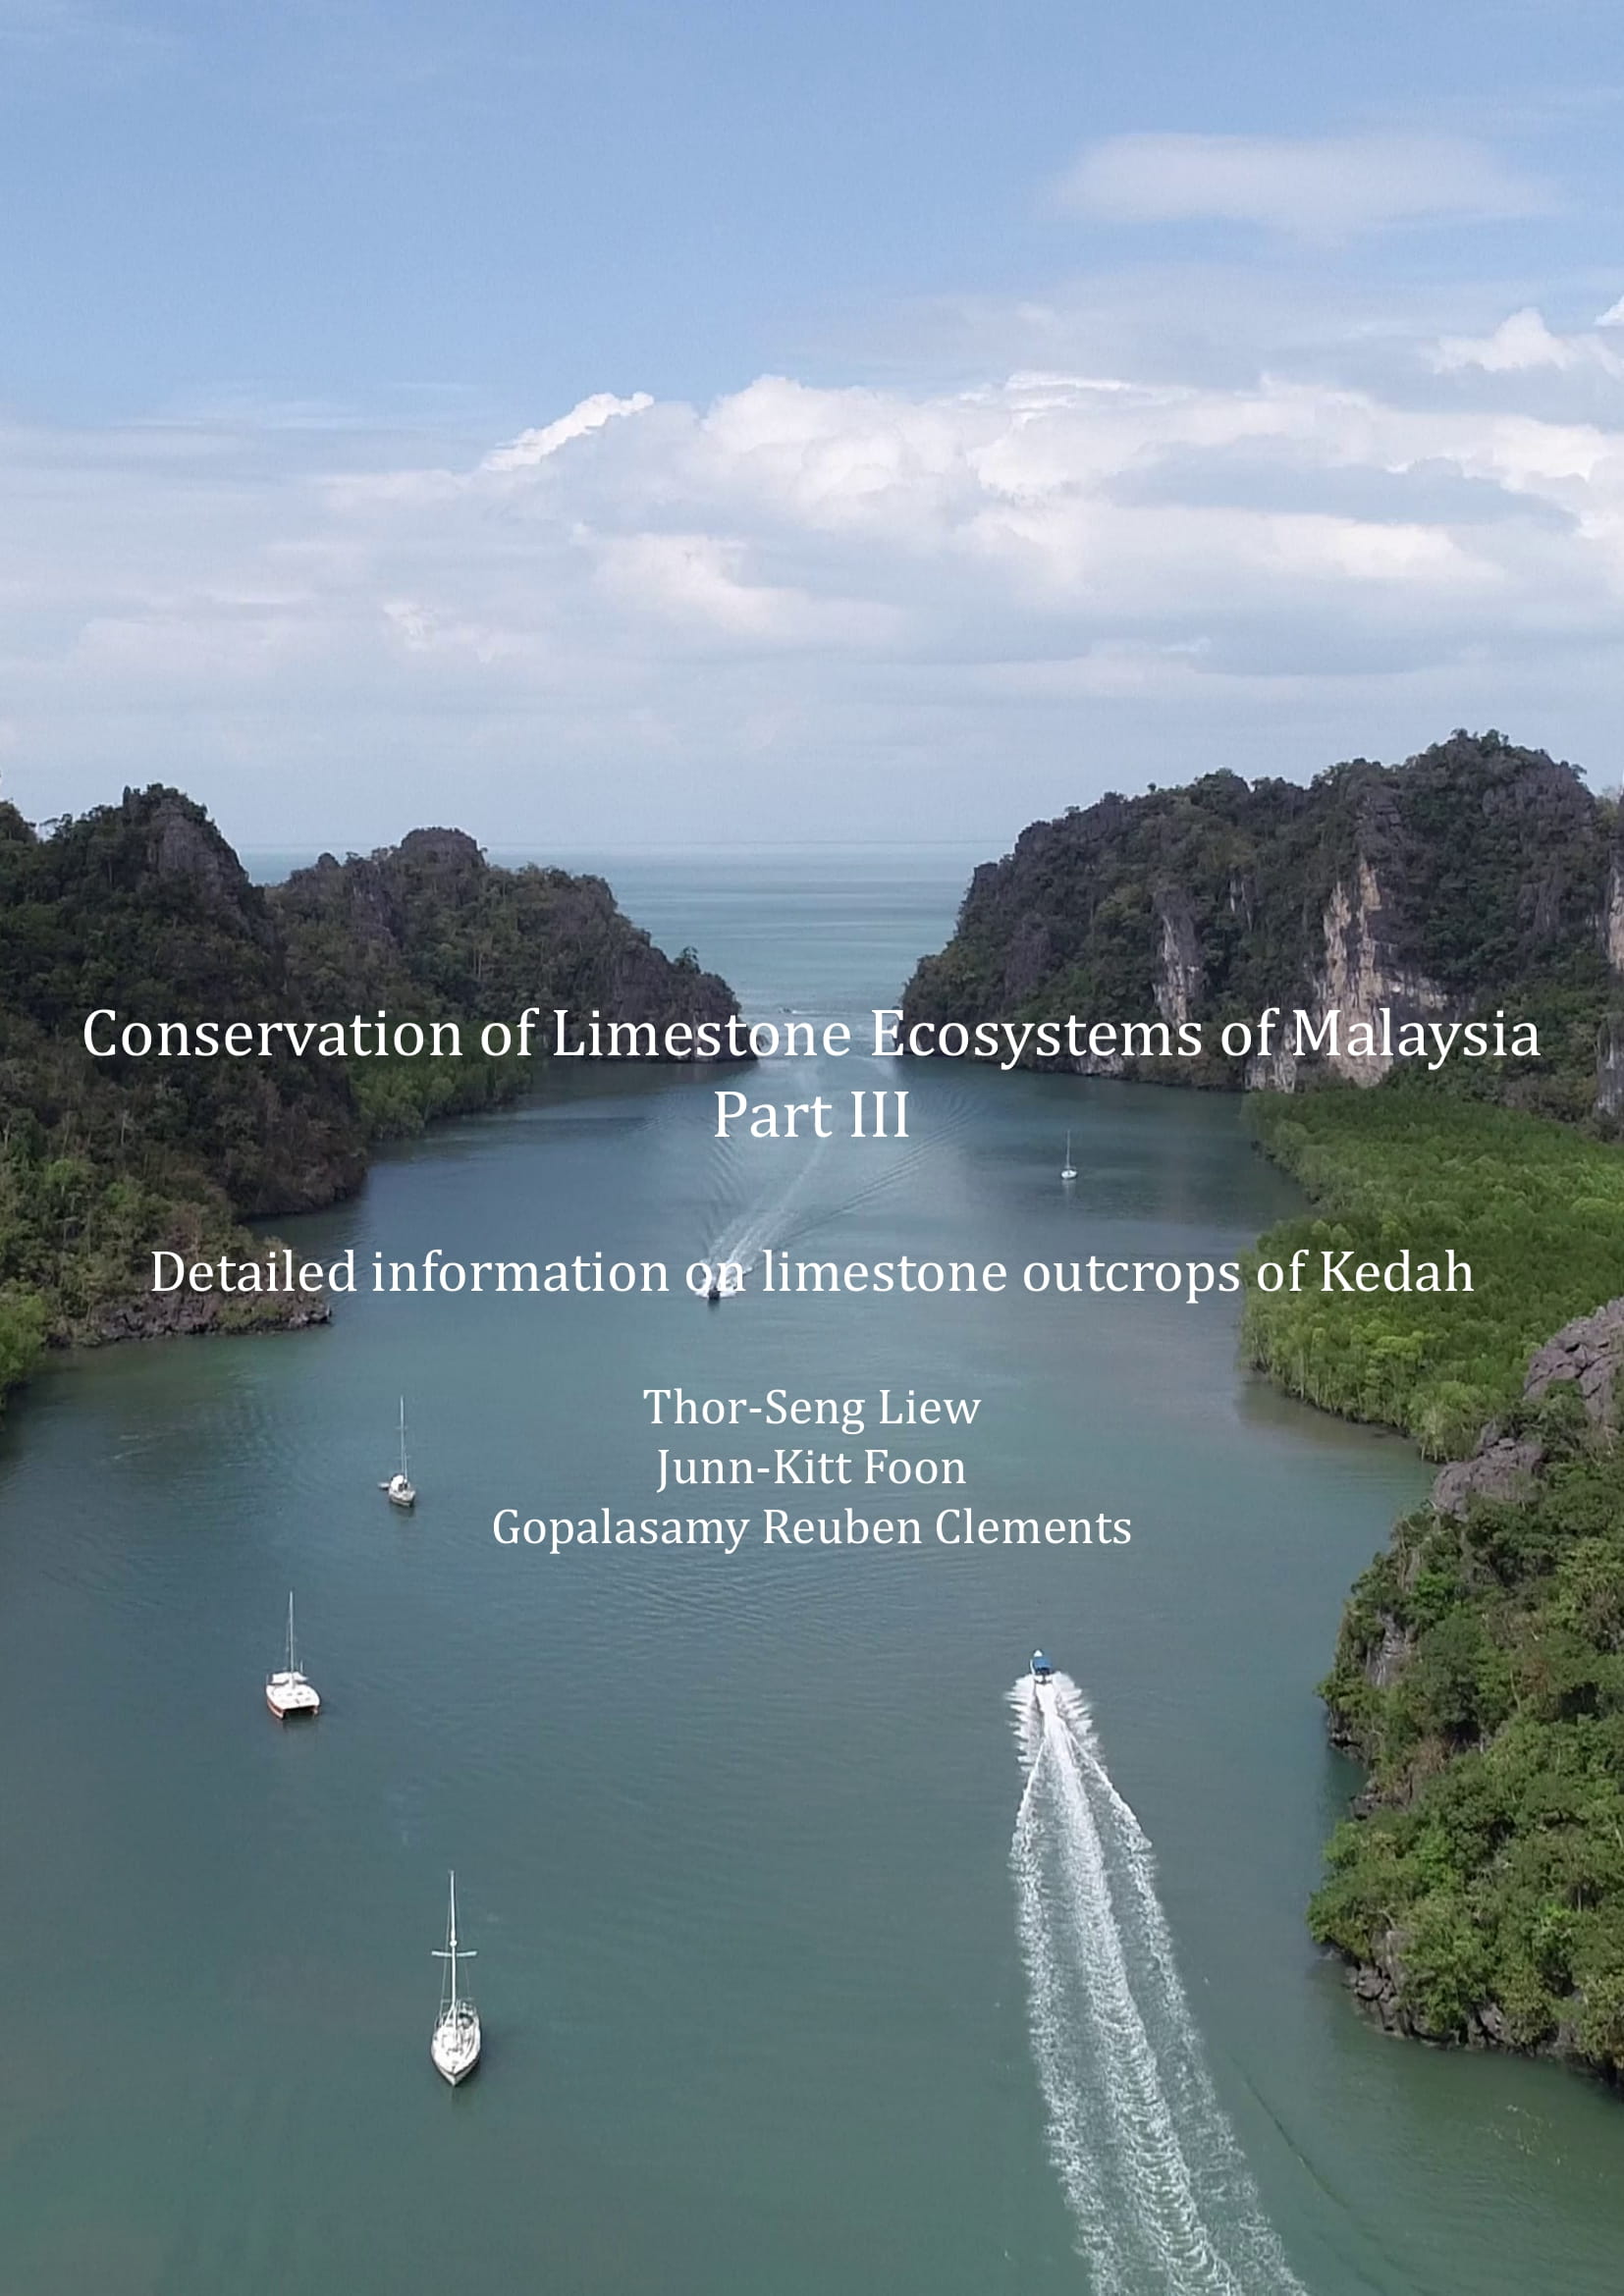 Conservation of Limestone Ecosystems of Malaysia, Part III, Detailed information on limestone outcrops of Kedah.